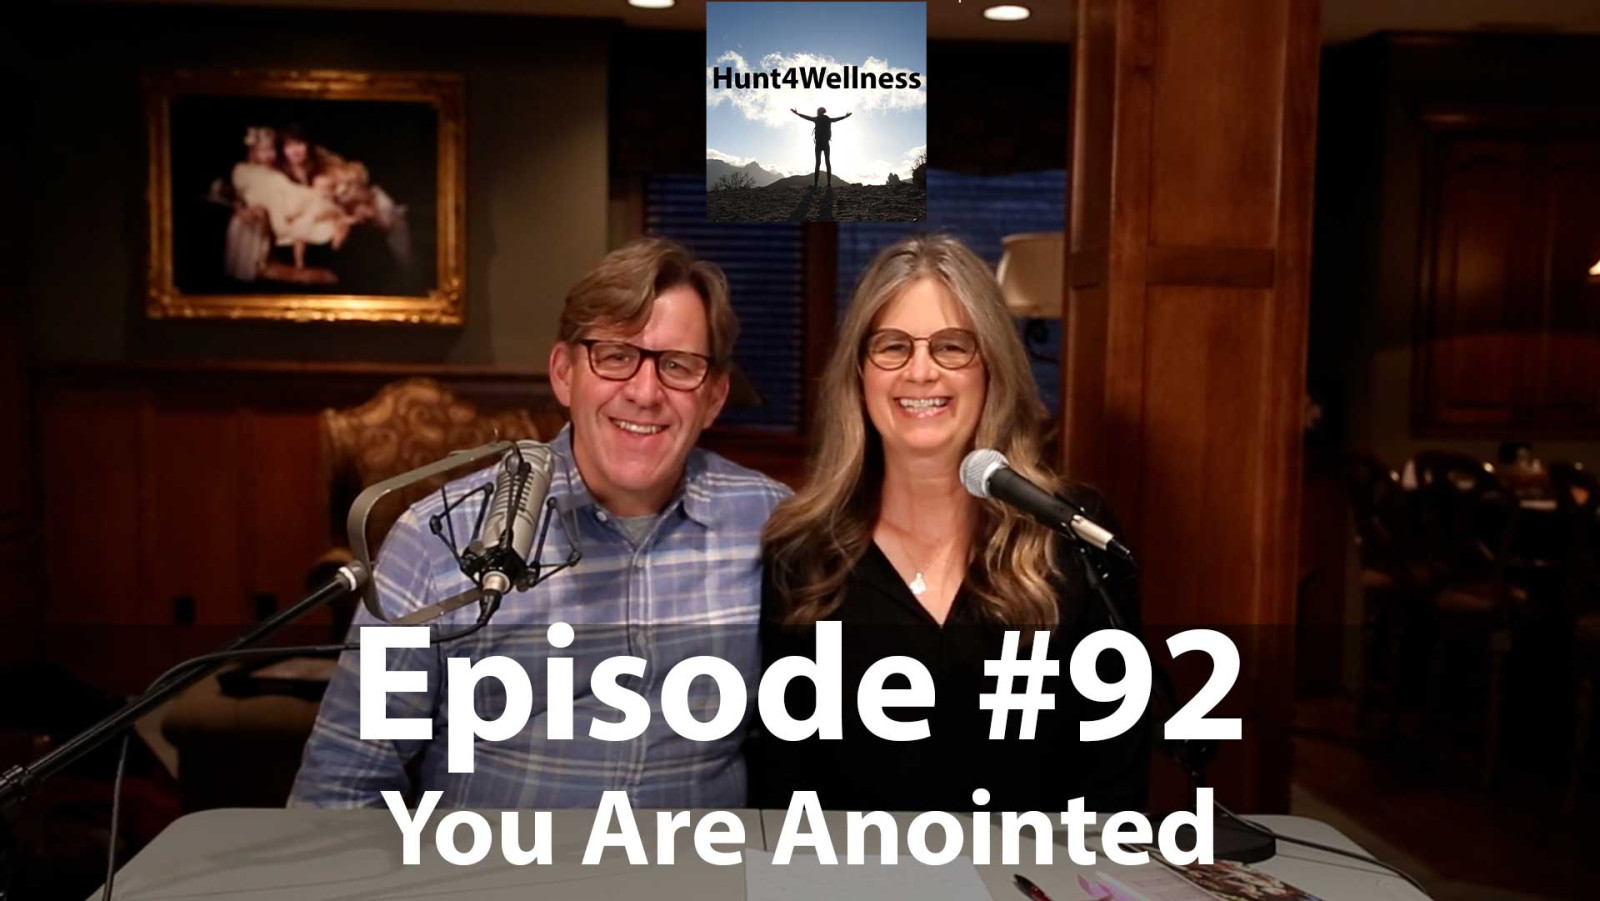 Episode #92 - You Are Anointed